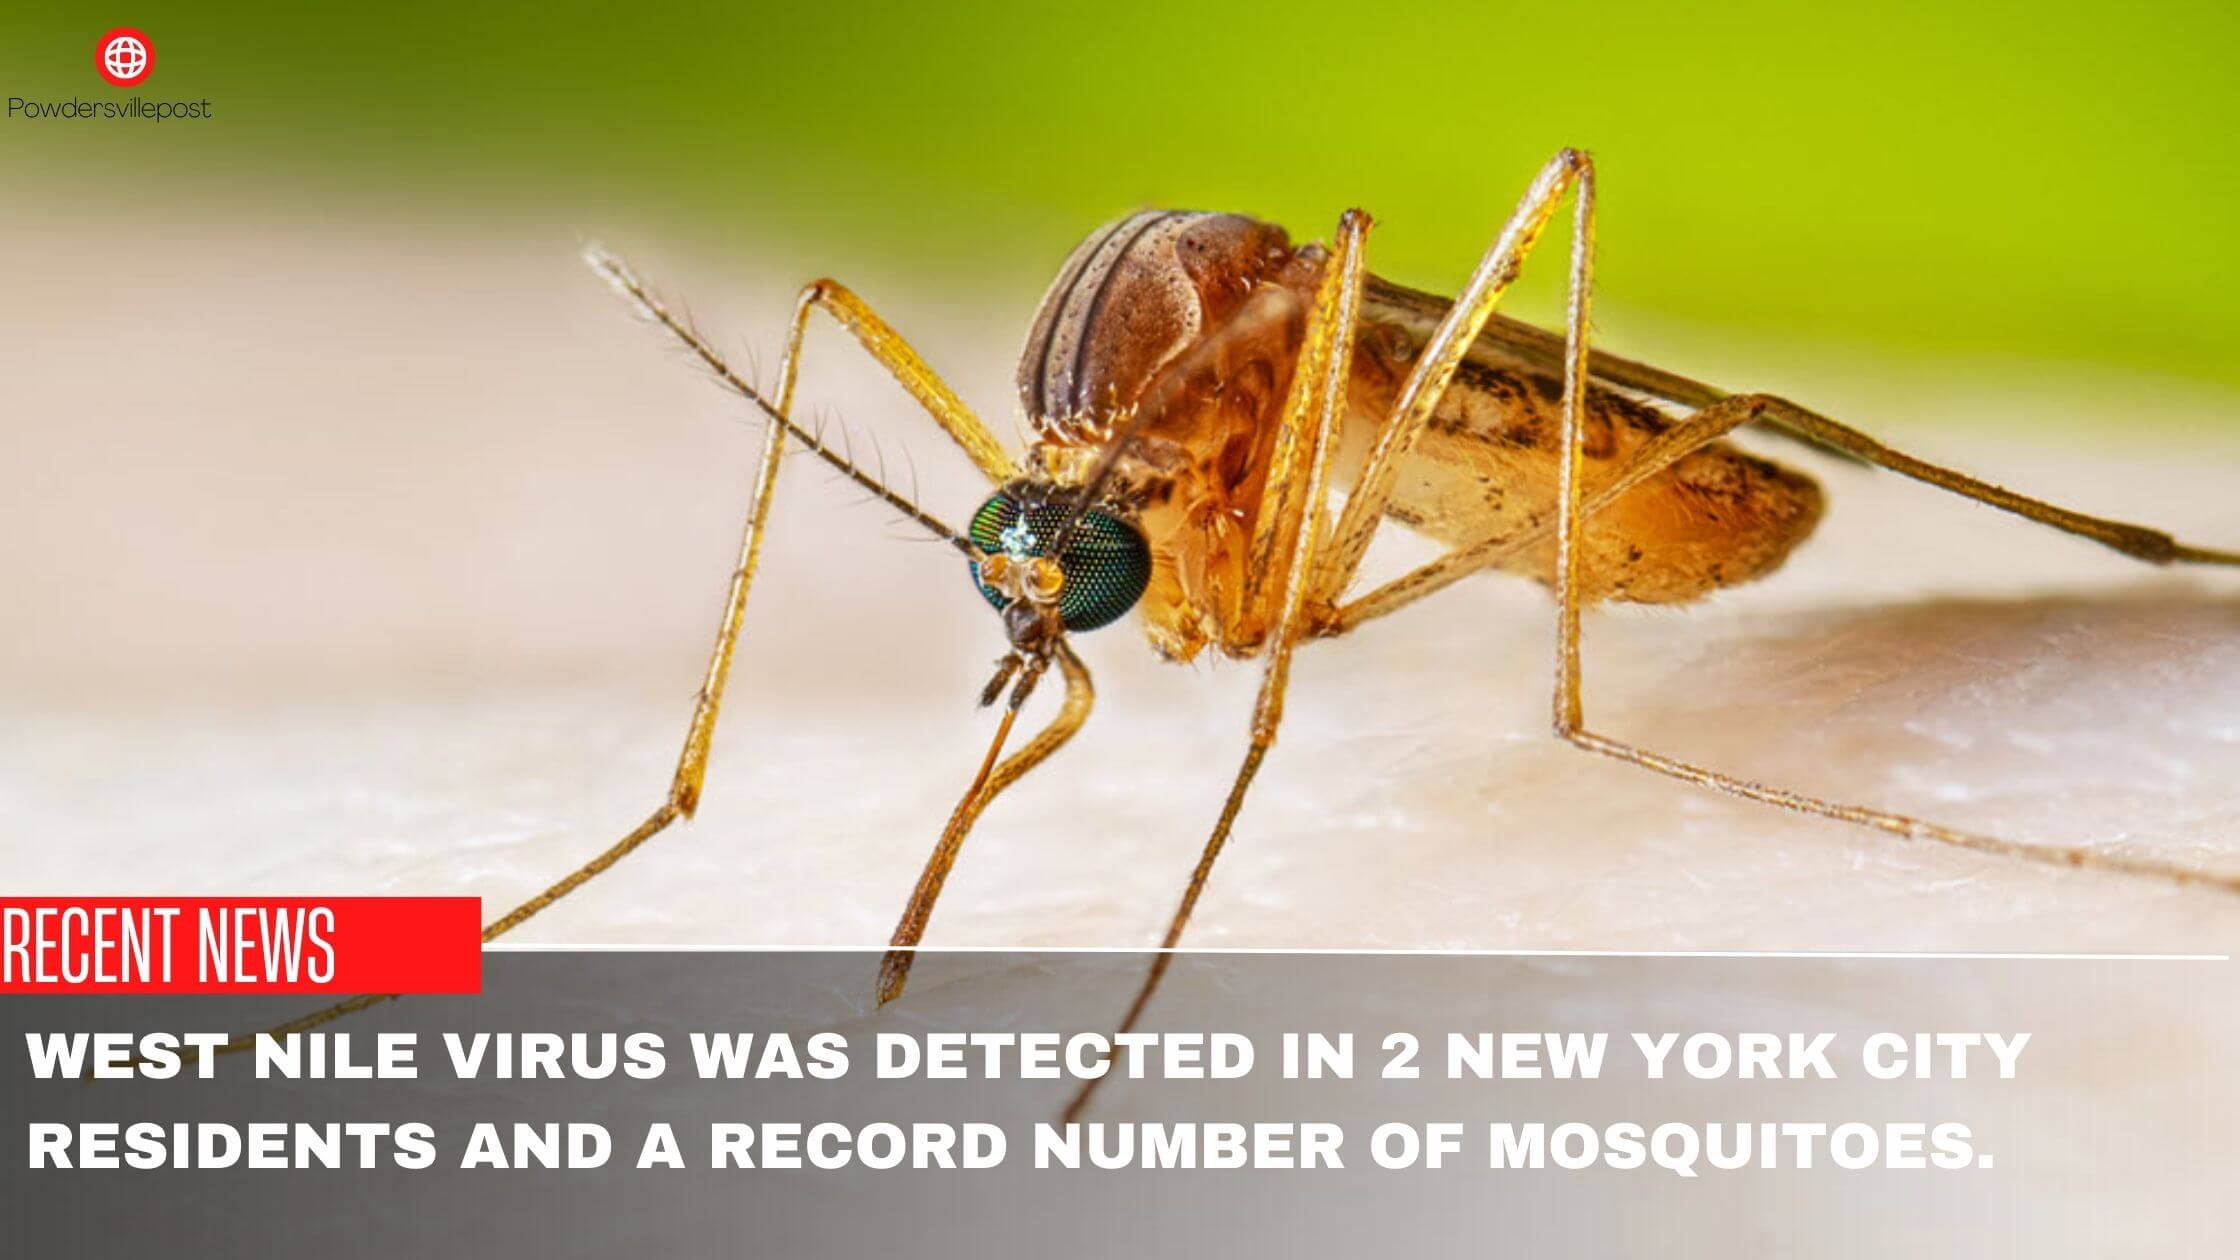 West Nile Virus Was Detected In 2 New York City Residents And A Record Number Of Mosquitoes.